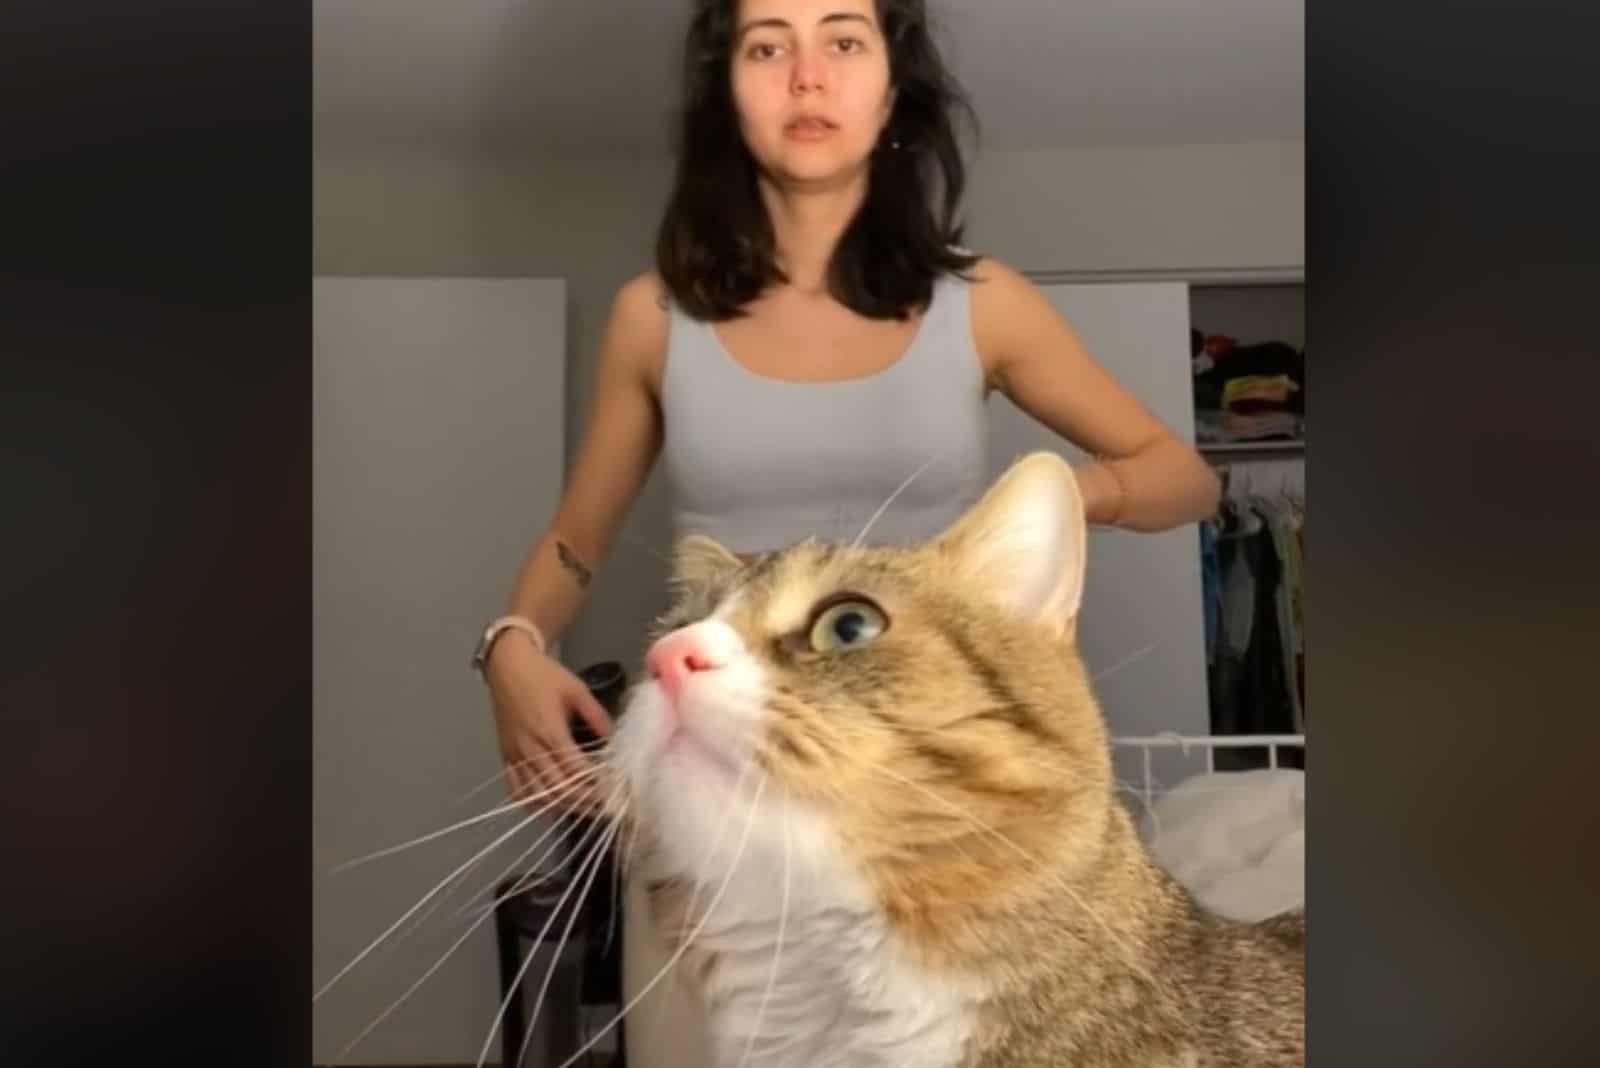 the cat interrupts the woman in the video